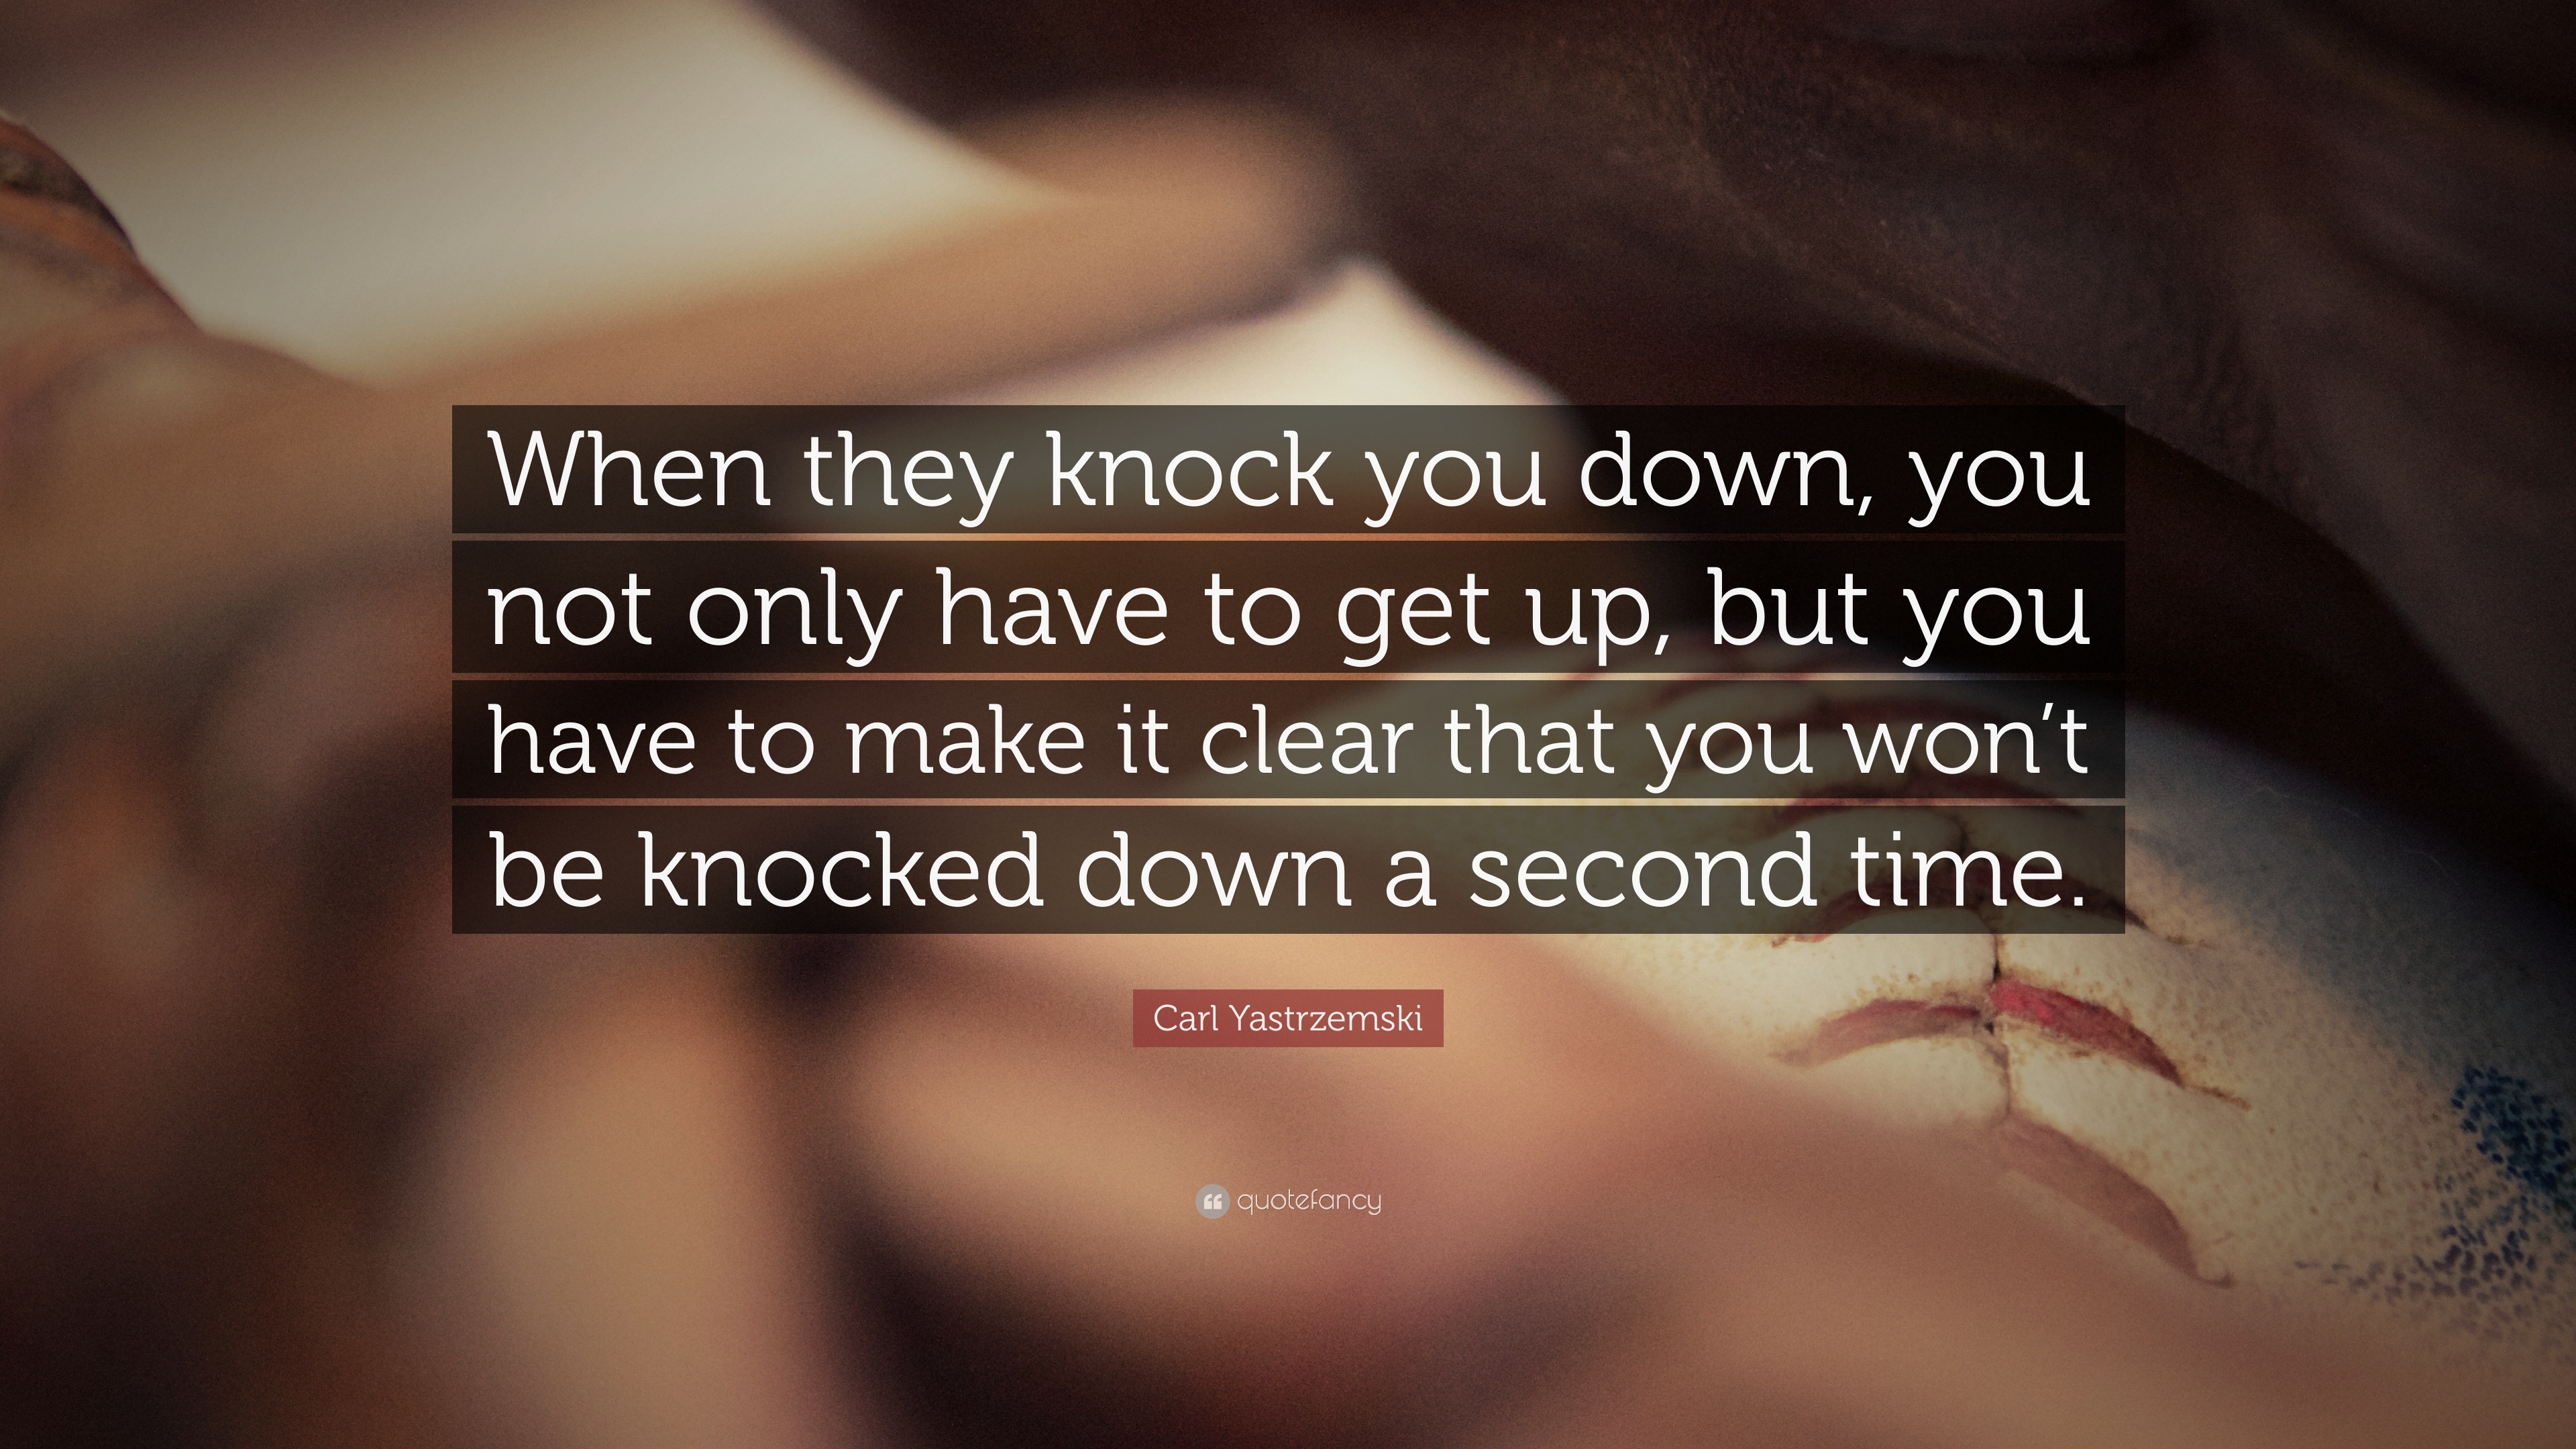 When they knock you down, you not only have to get up